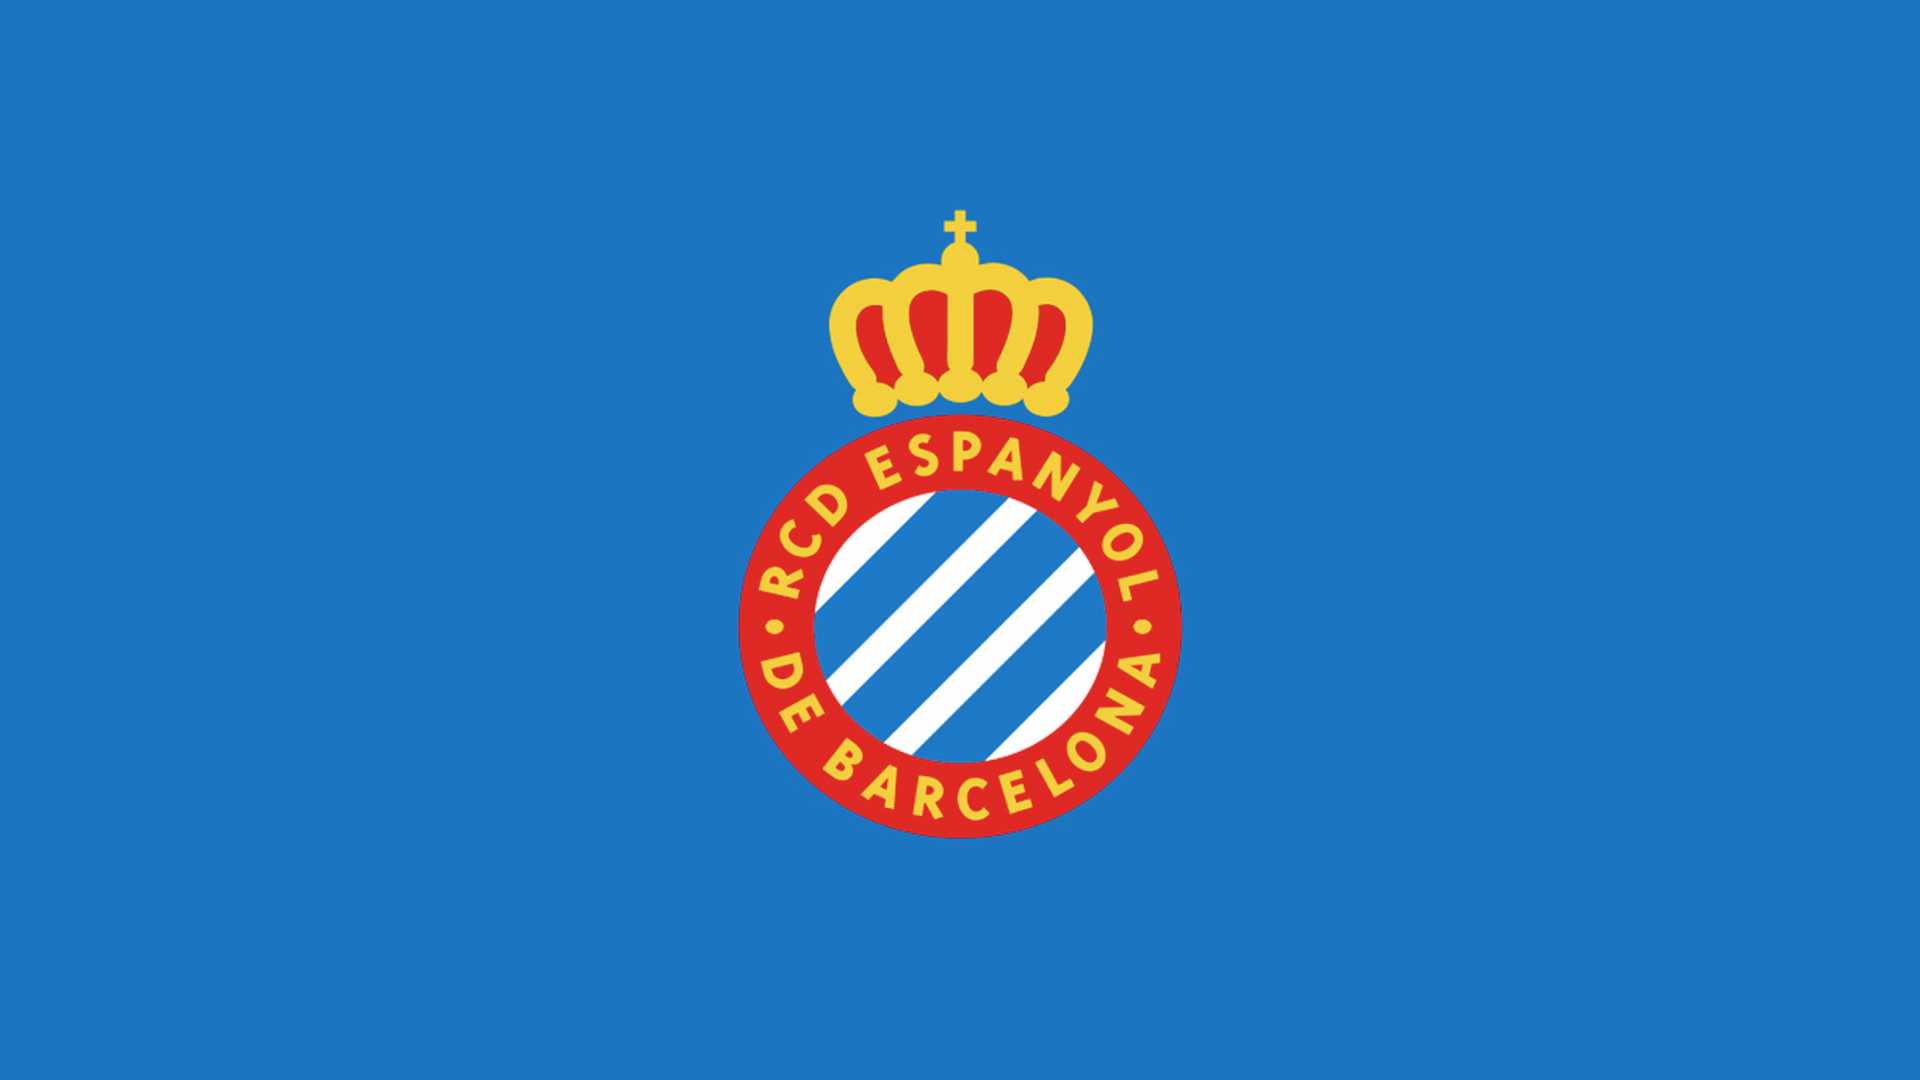 First departures from RCD Espanyol Femení